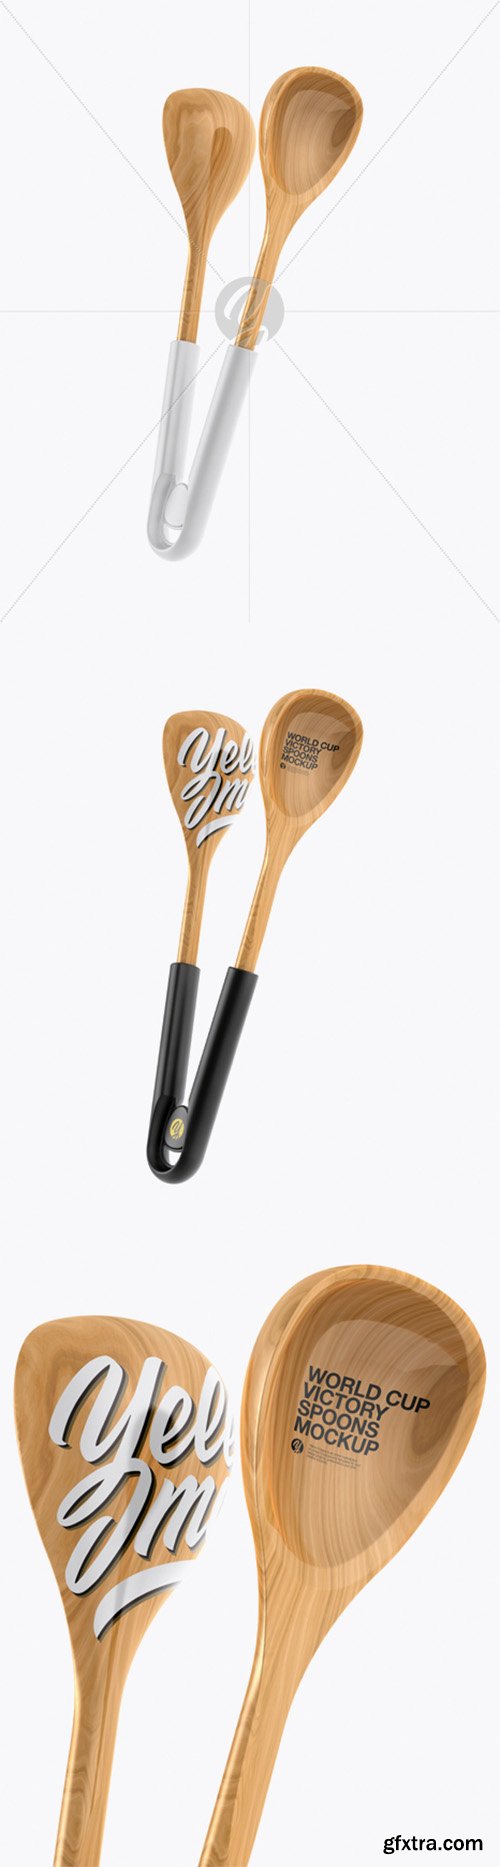 Wooden World Cup Victory Spoons Mockup - Half Side View 25591